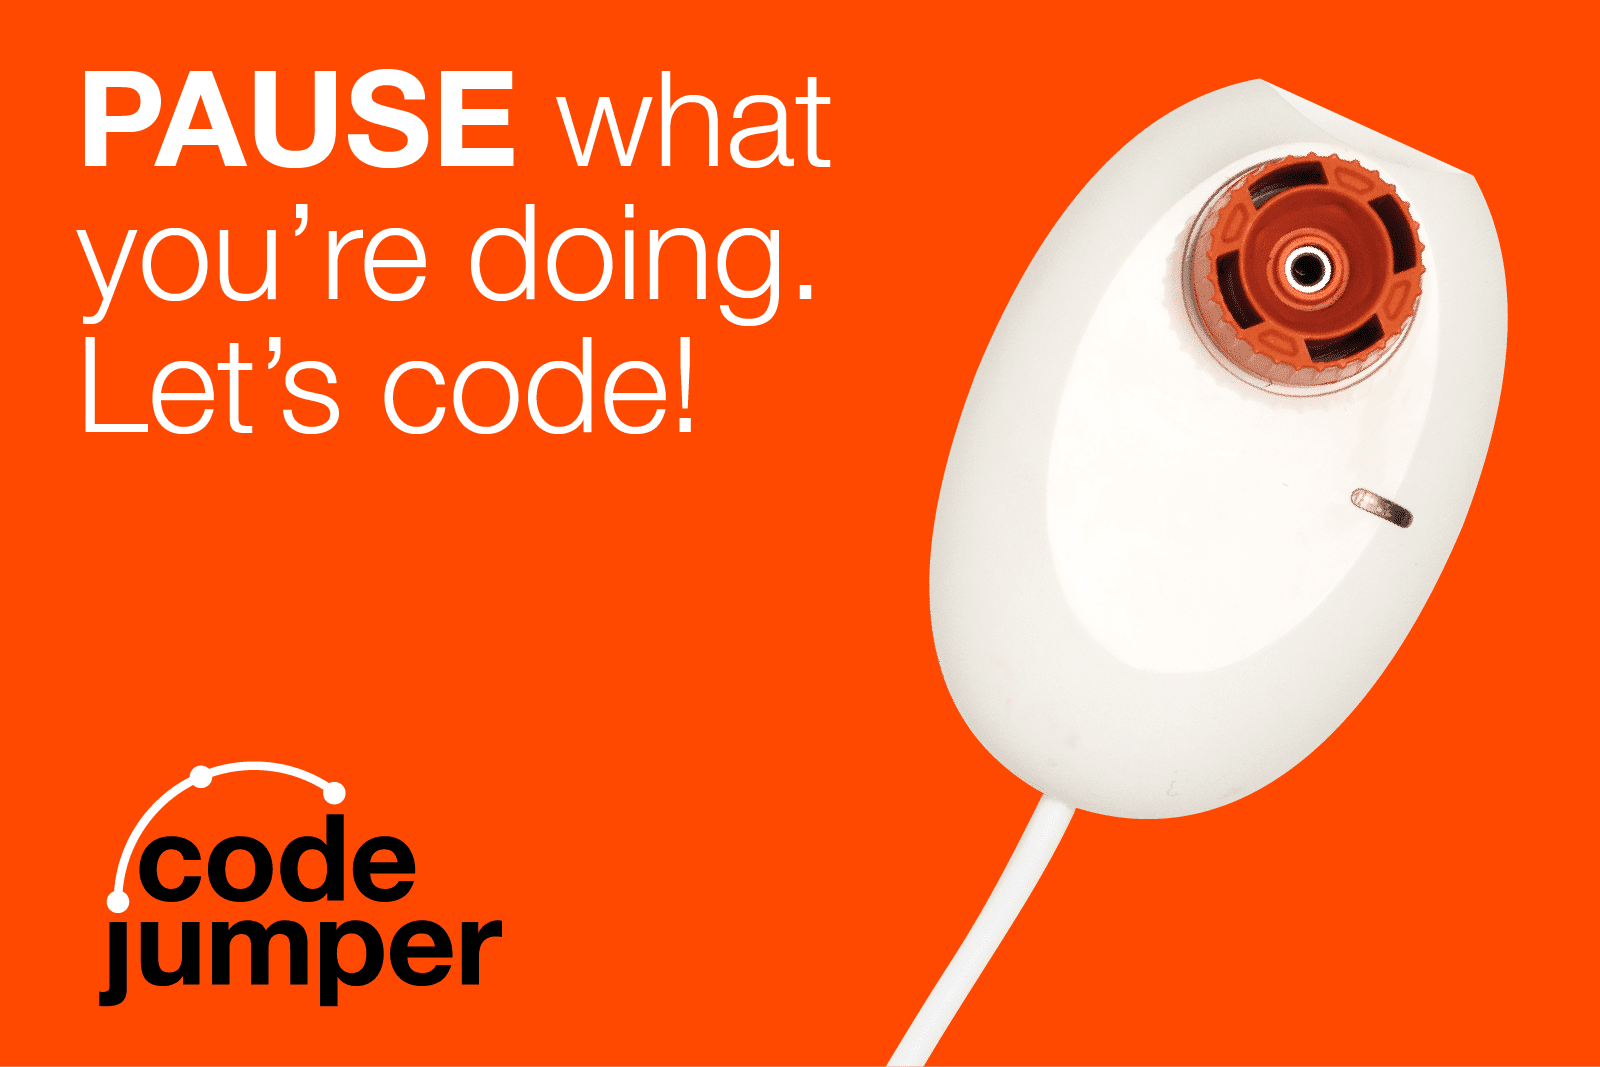 a white code jumper pod with a red dial on a red background. Text reads "PAUSE what you're doing. Let's code!" Code Jumper logo